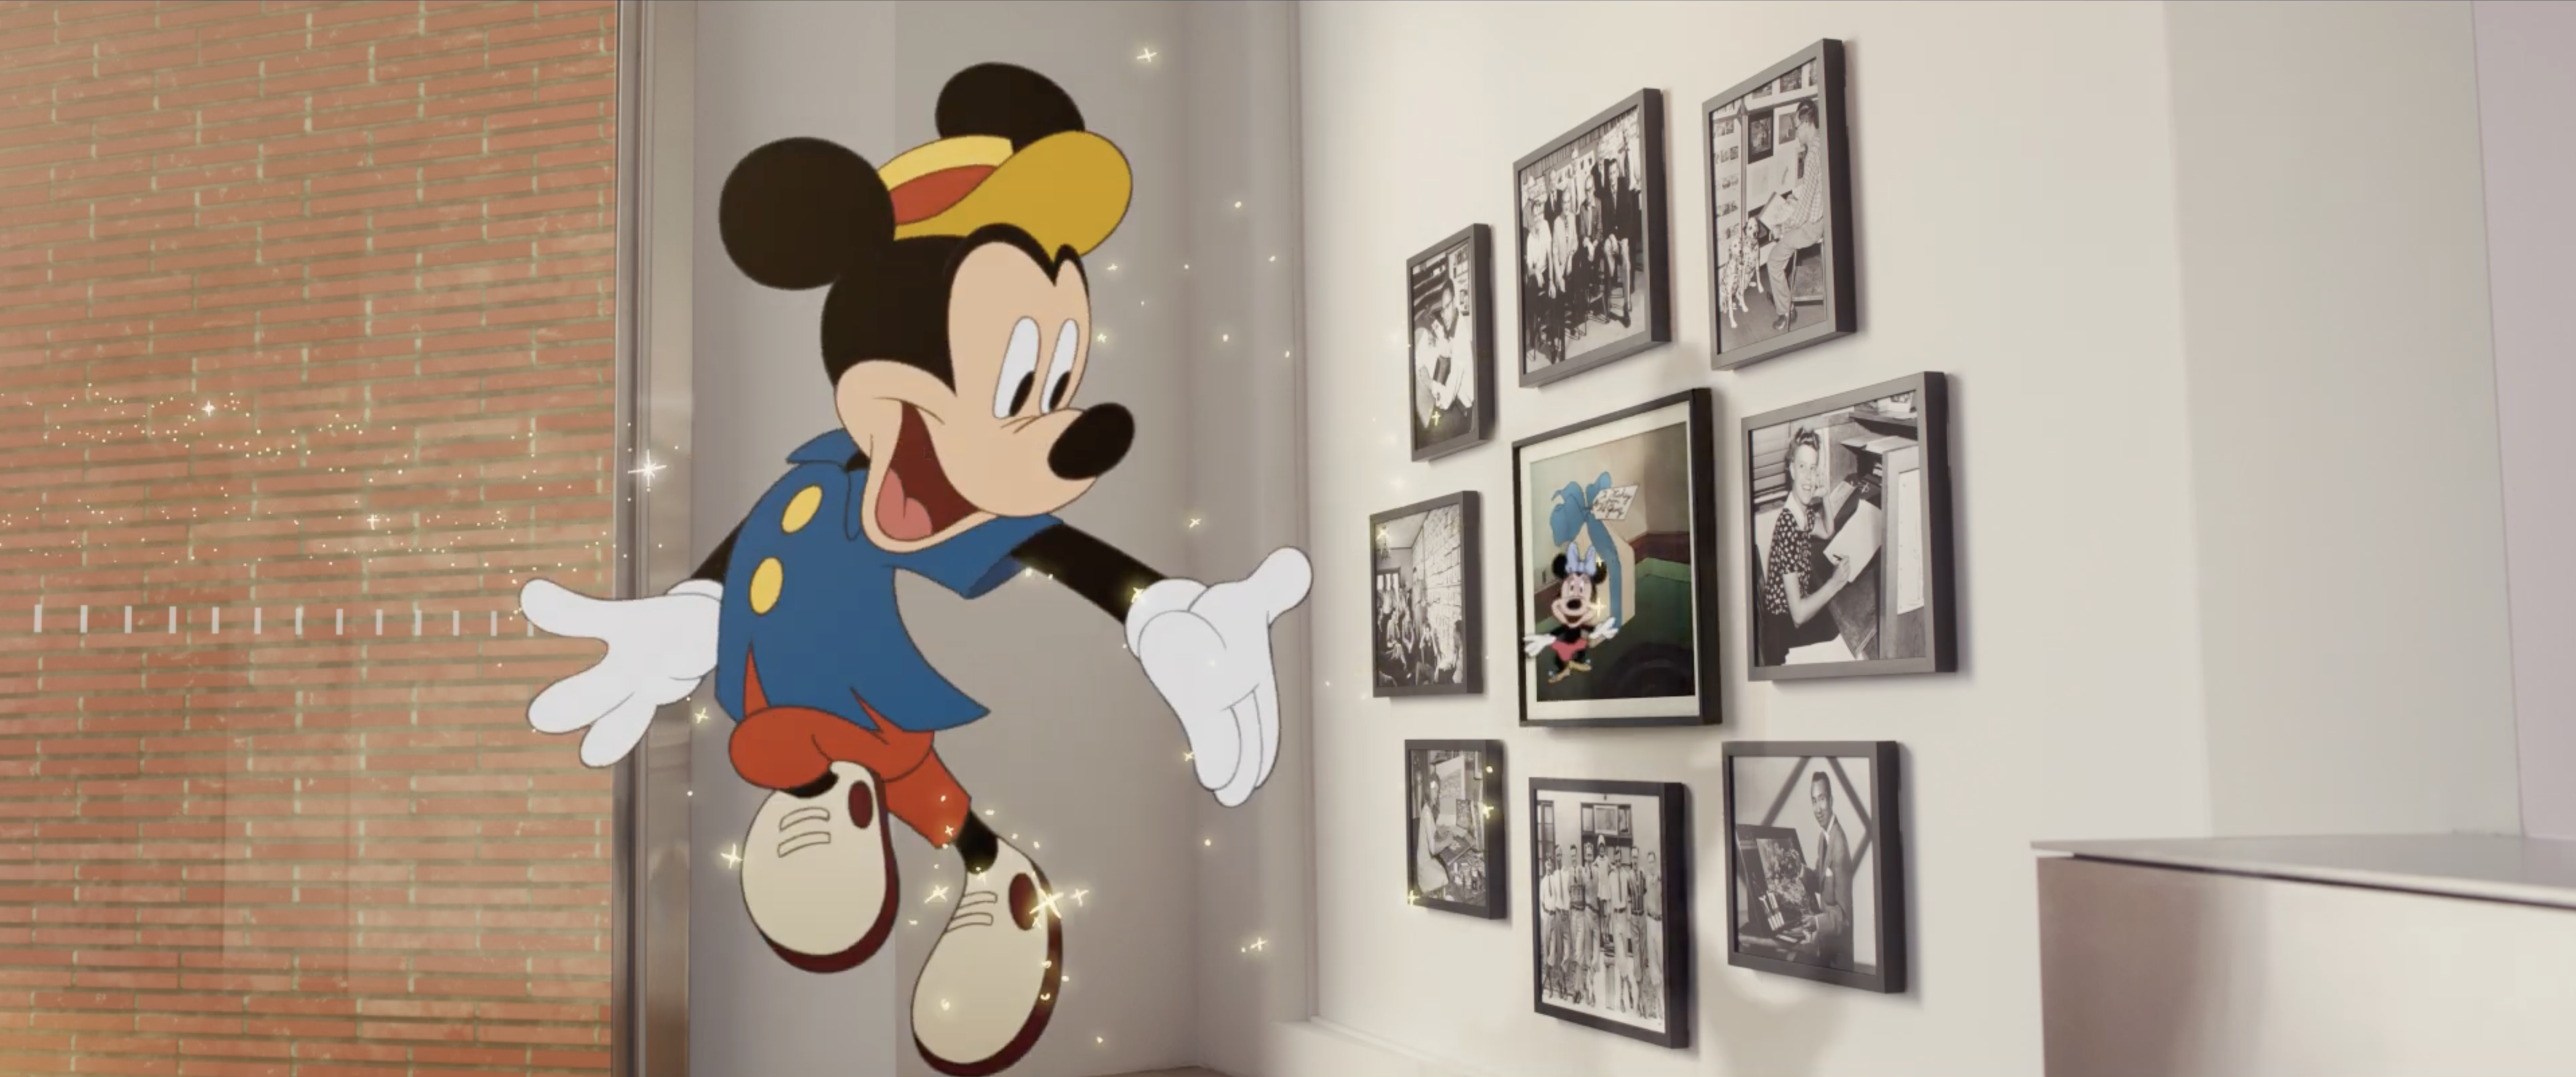 Disney’s “Once Upon A Studio” Is A Celebration Of 100 Years Of Animation